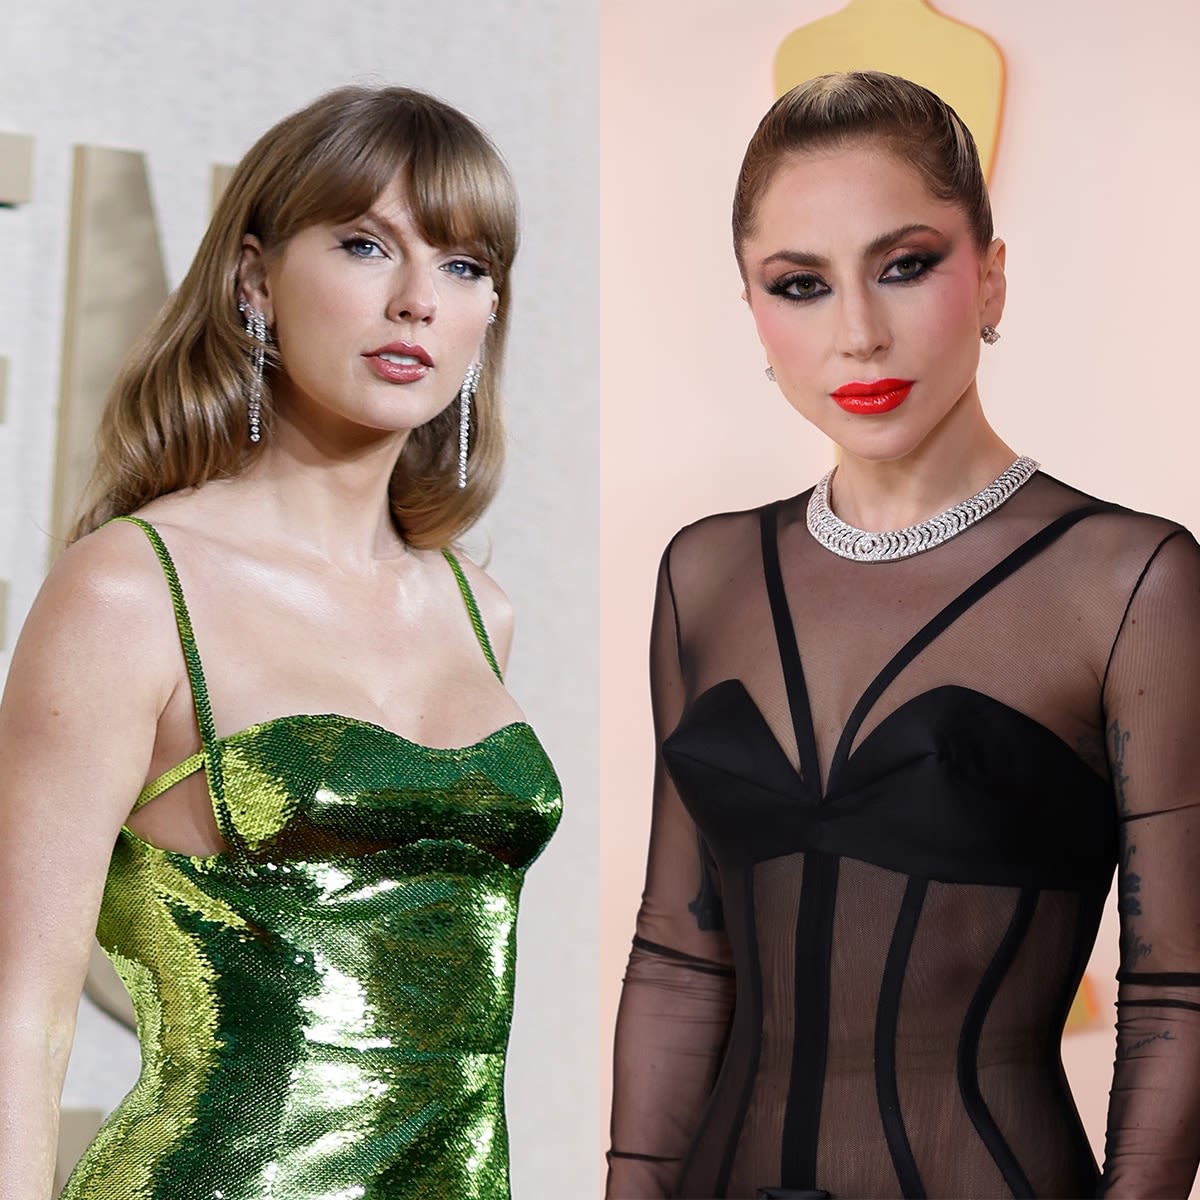 Taylor Swift Defends Lady Gaga From "Invasive" Body Comments